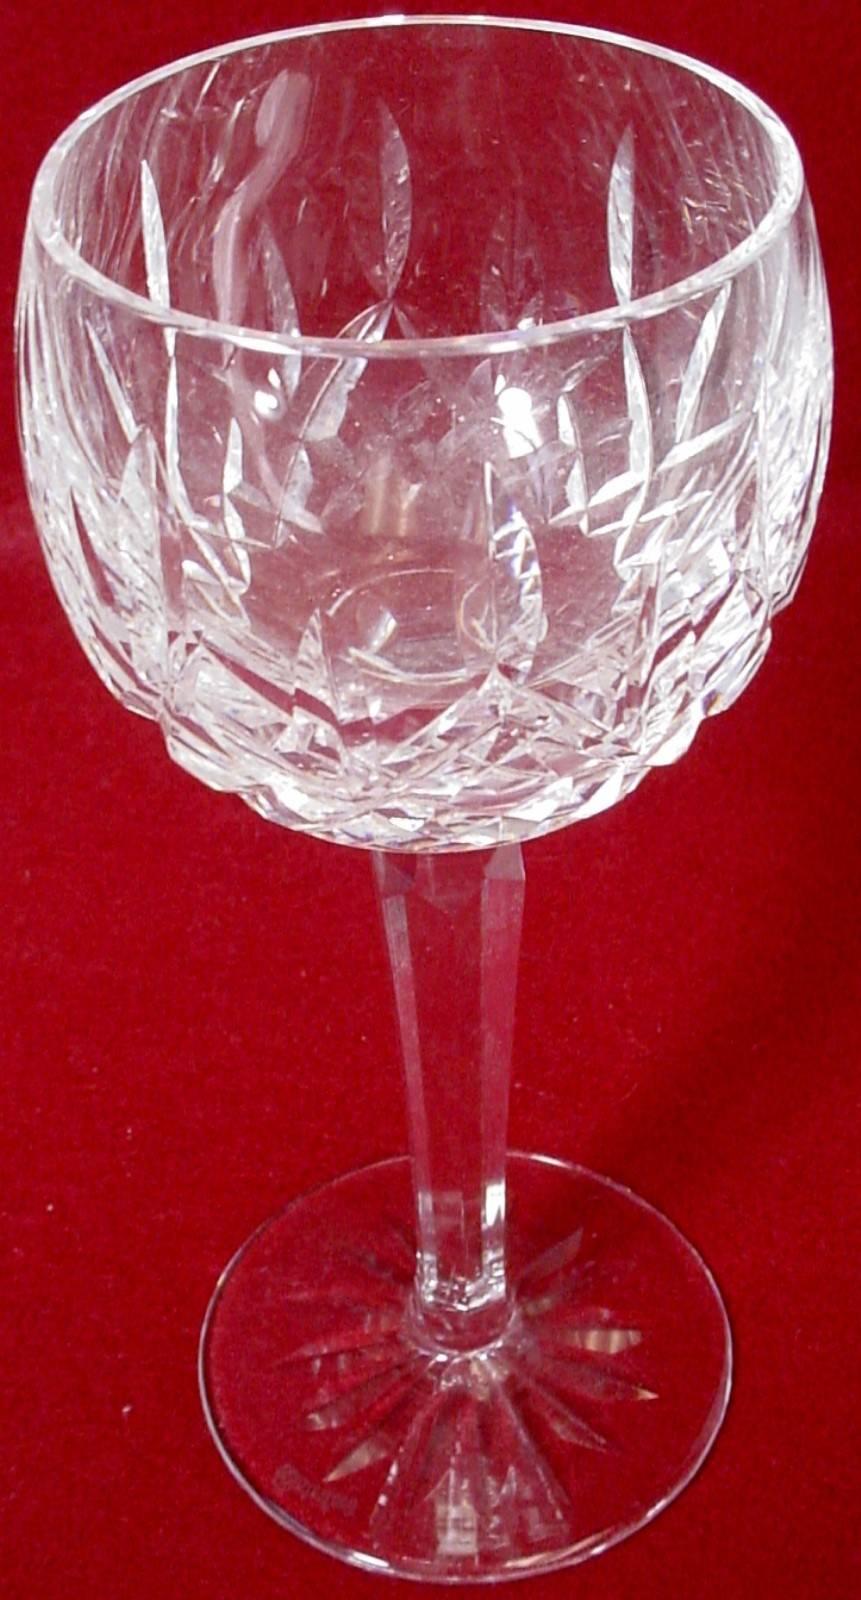 WATERFORD crystal LISMORE pattern HOCK WINE GLASS

in great condition free from stain or discoloration and with only a minimum of use. 

• Measures @ 7-1/2